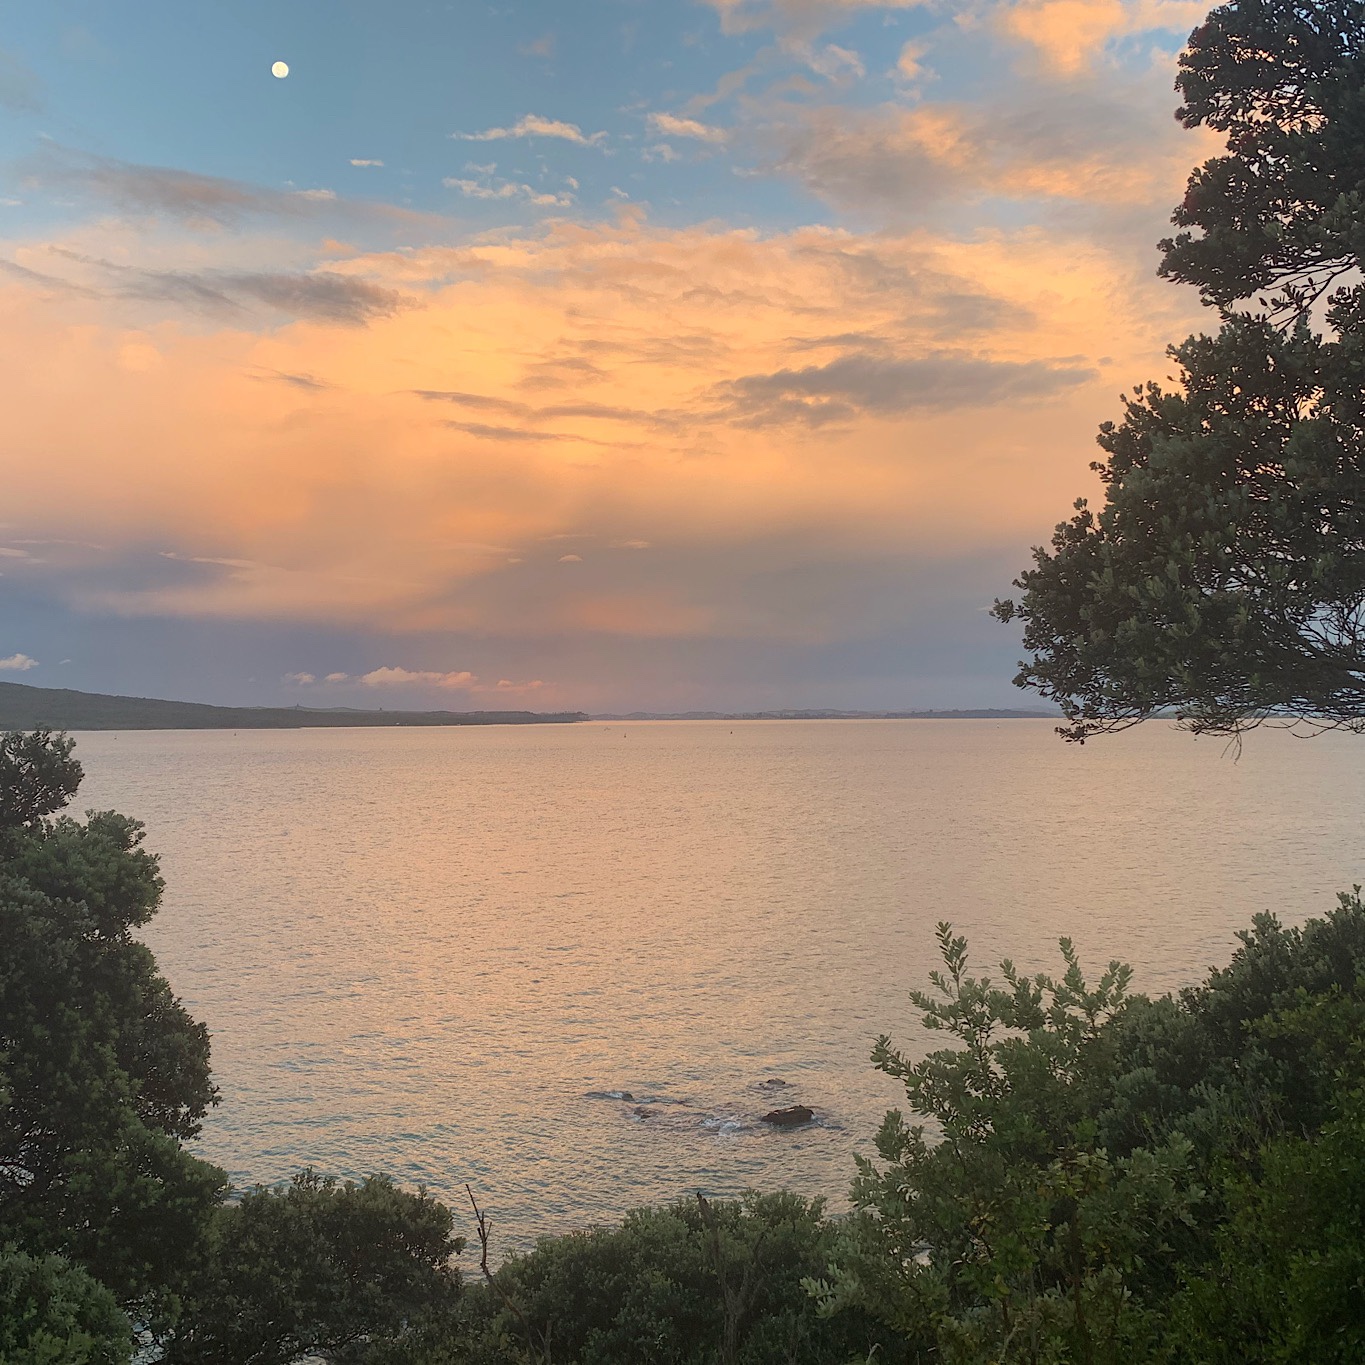 After pouring rain, the sun came out at North Head and gave me a gorgeous sunset and moon.